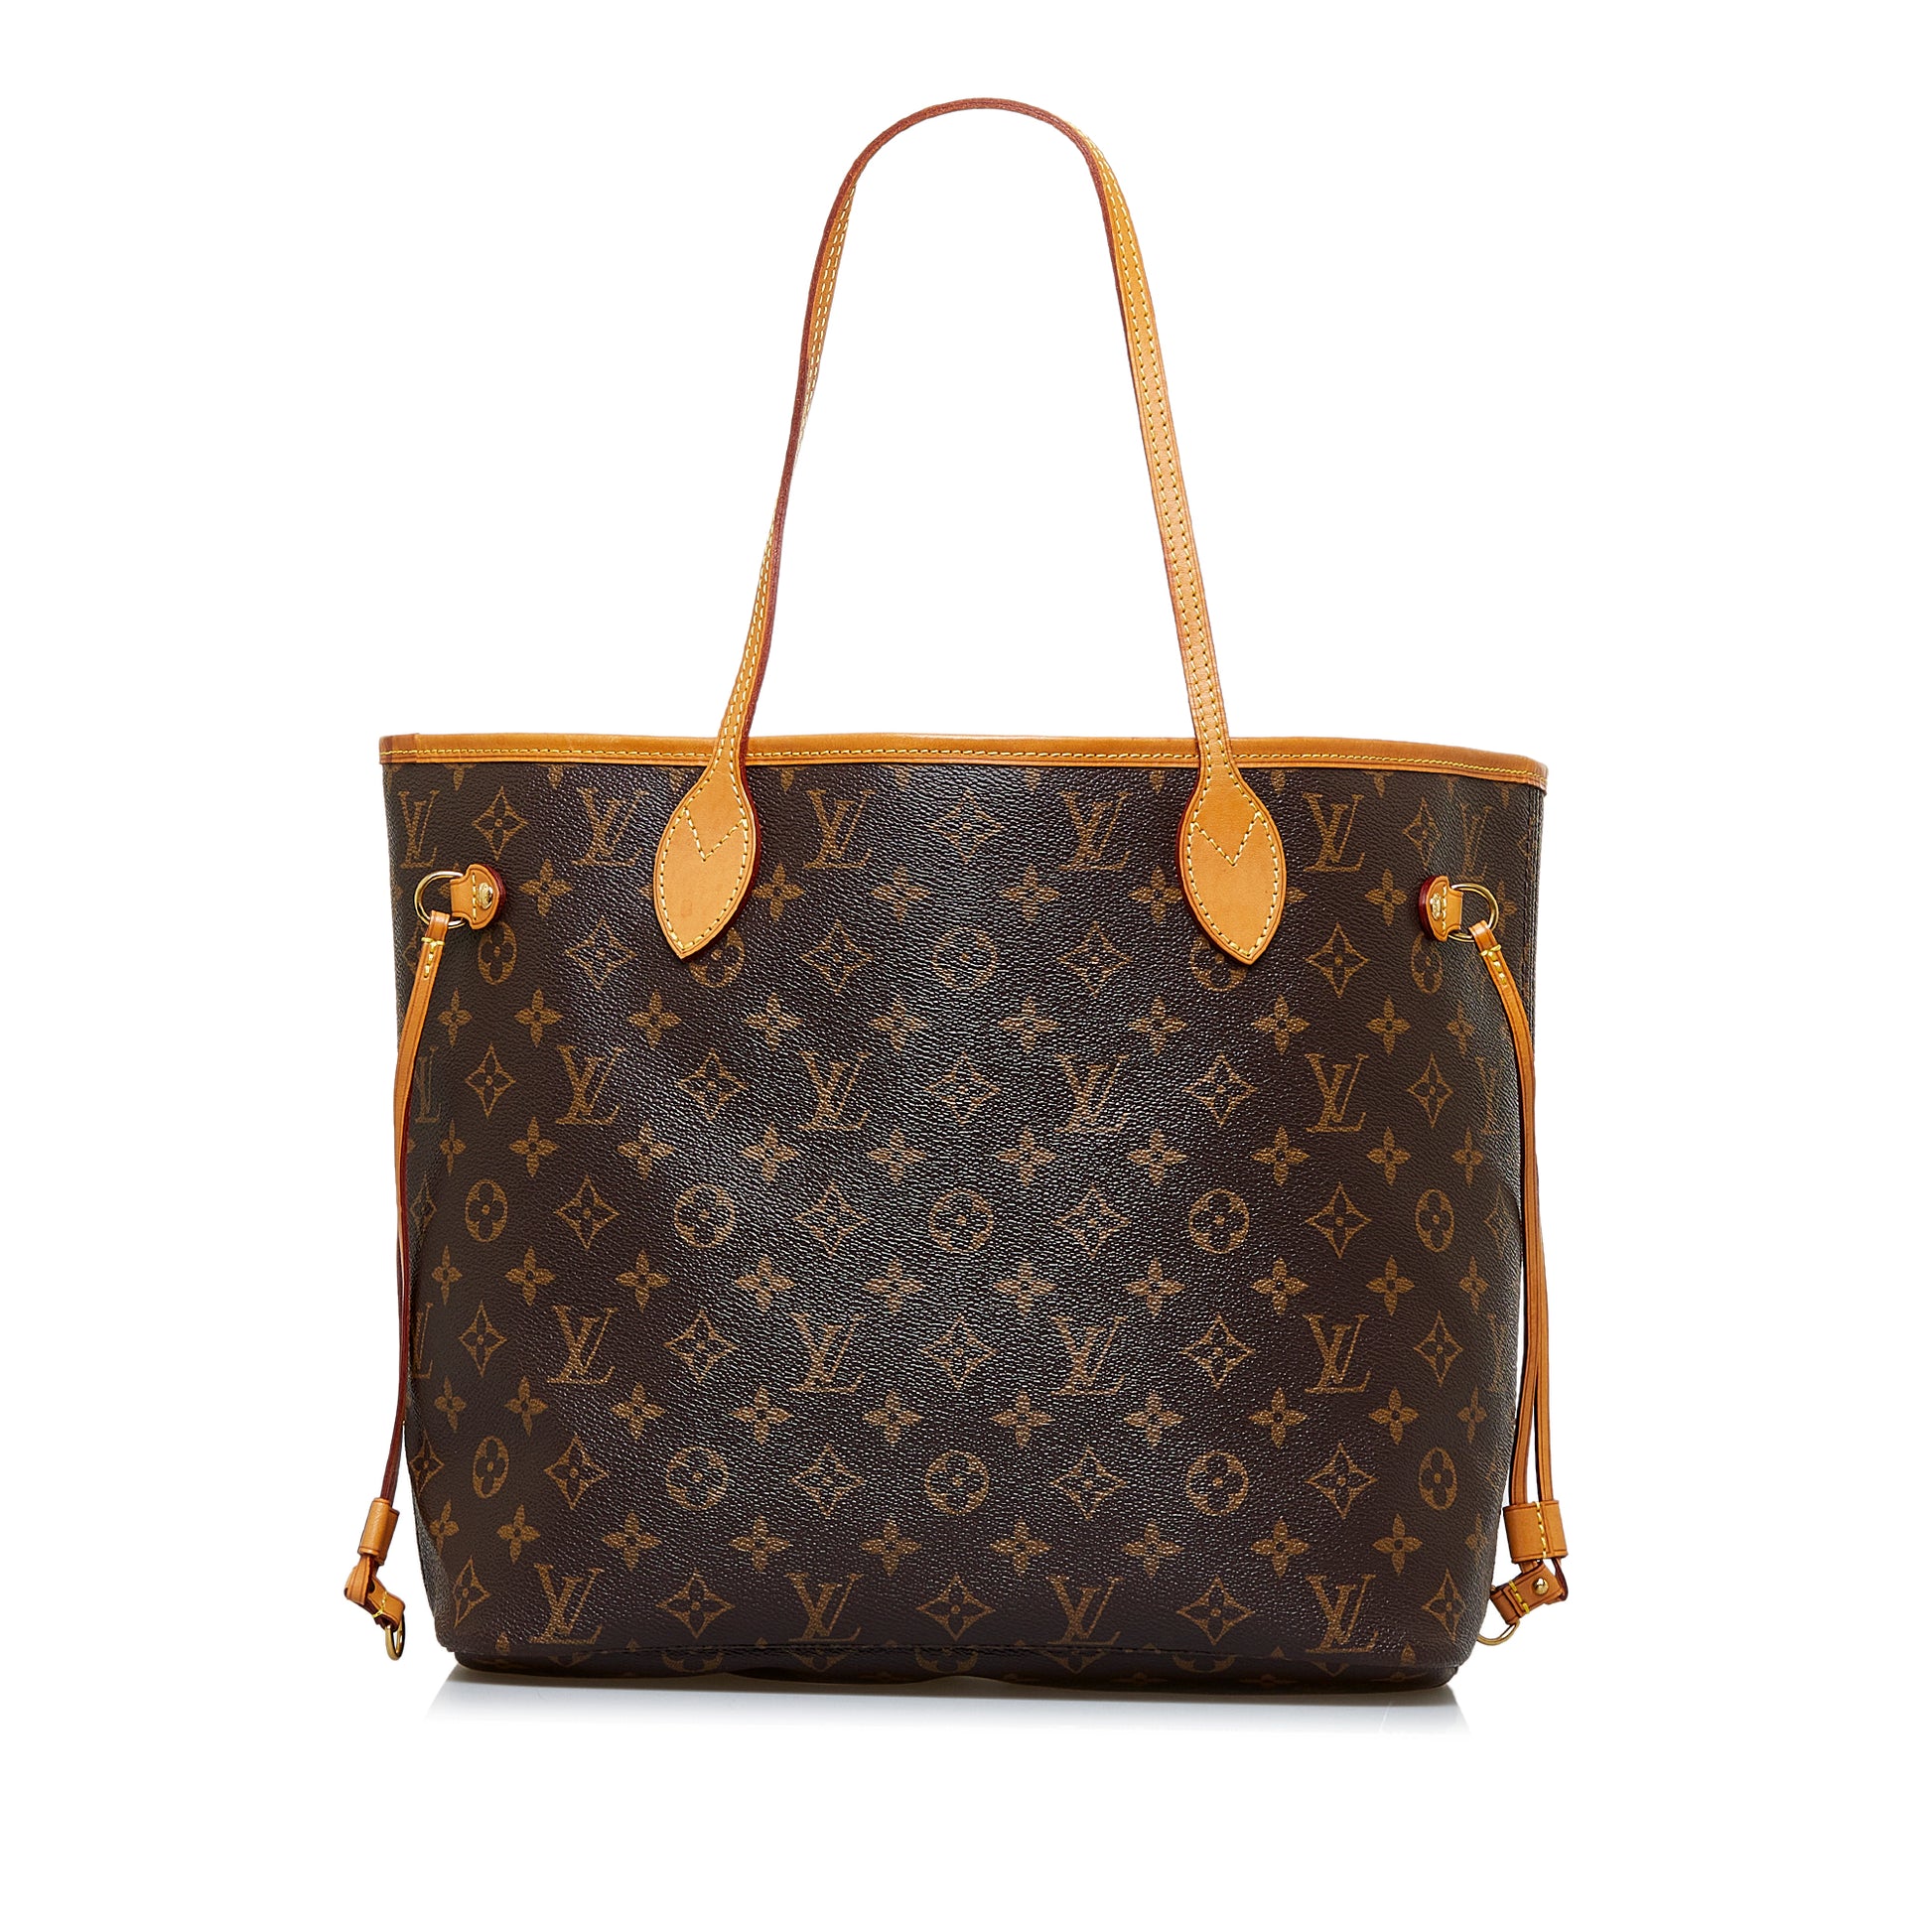 Monogram Keepall 50 Duffle Bag (Authentic Pre-Owned) – The Lady Bag